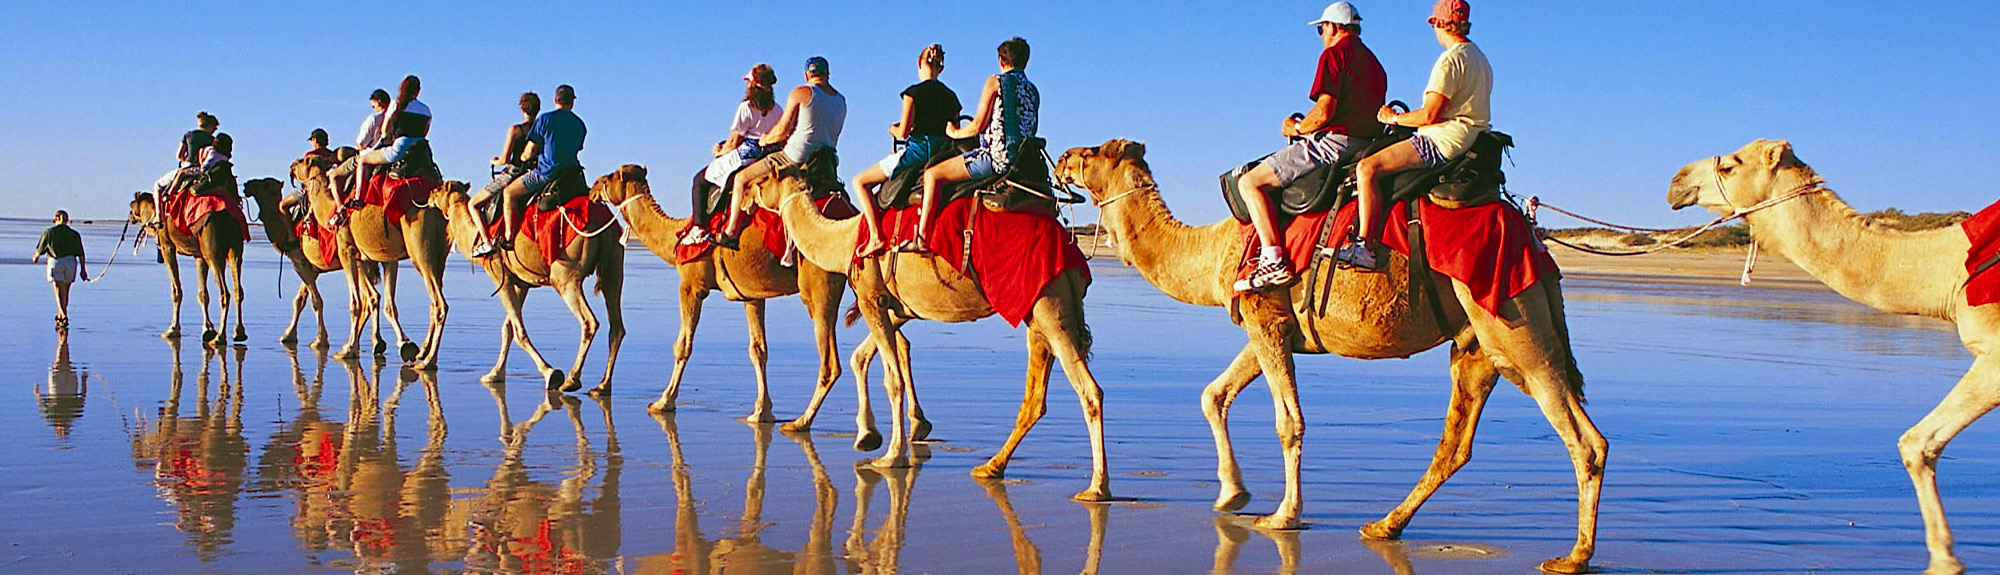 Tourists riding on camels